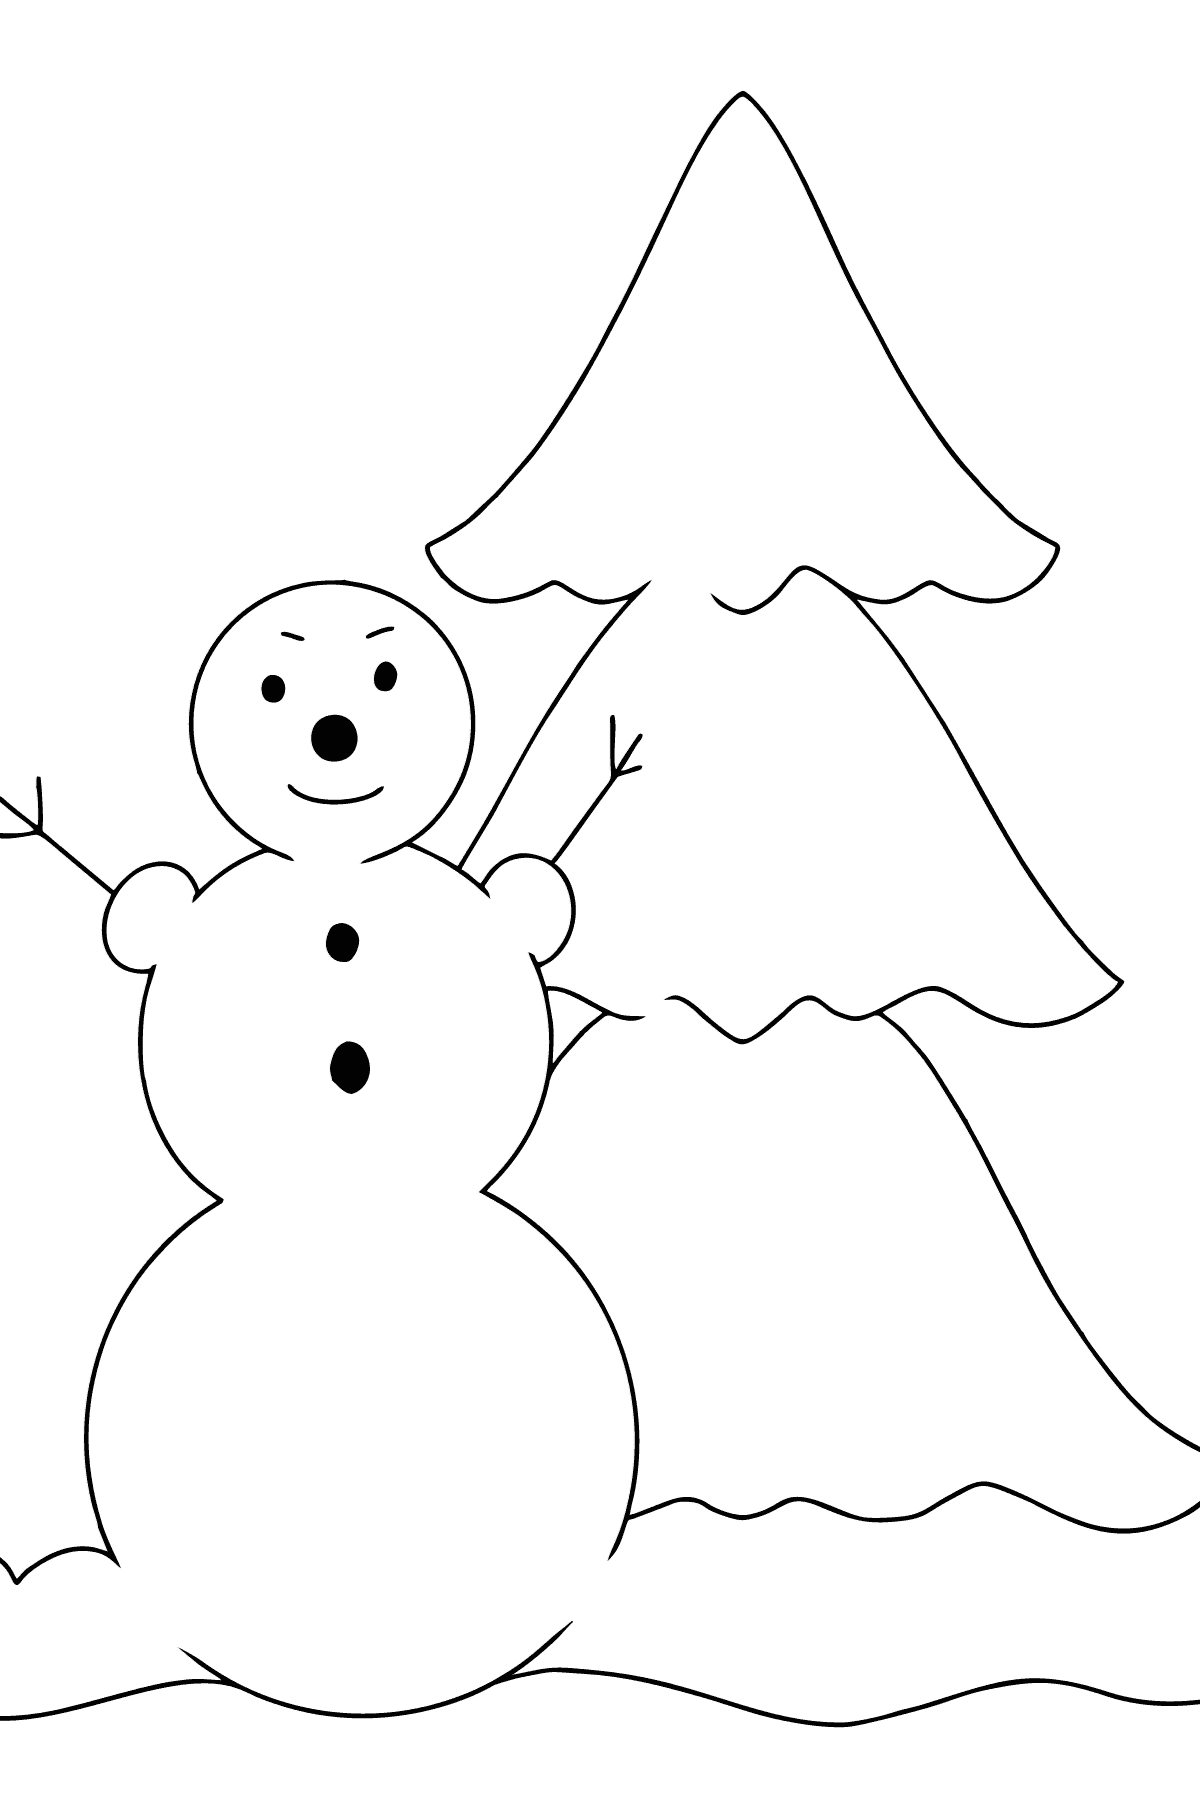 Simple coloring snowman - Coloring Pages for Kids